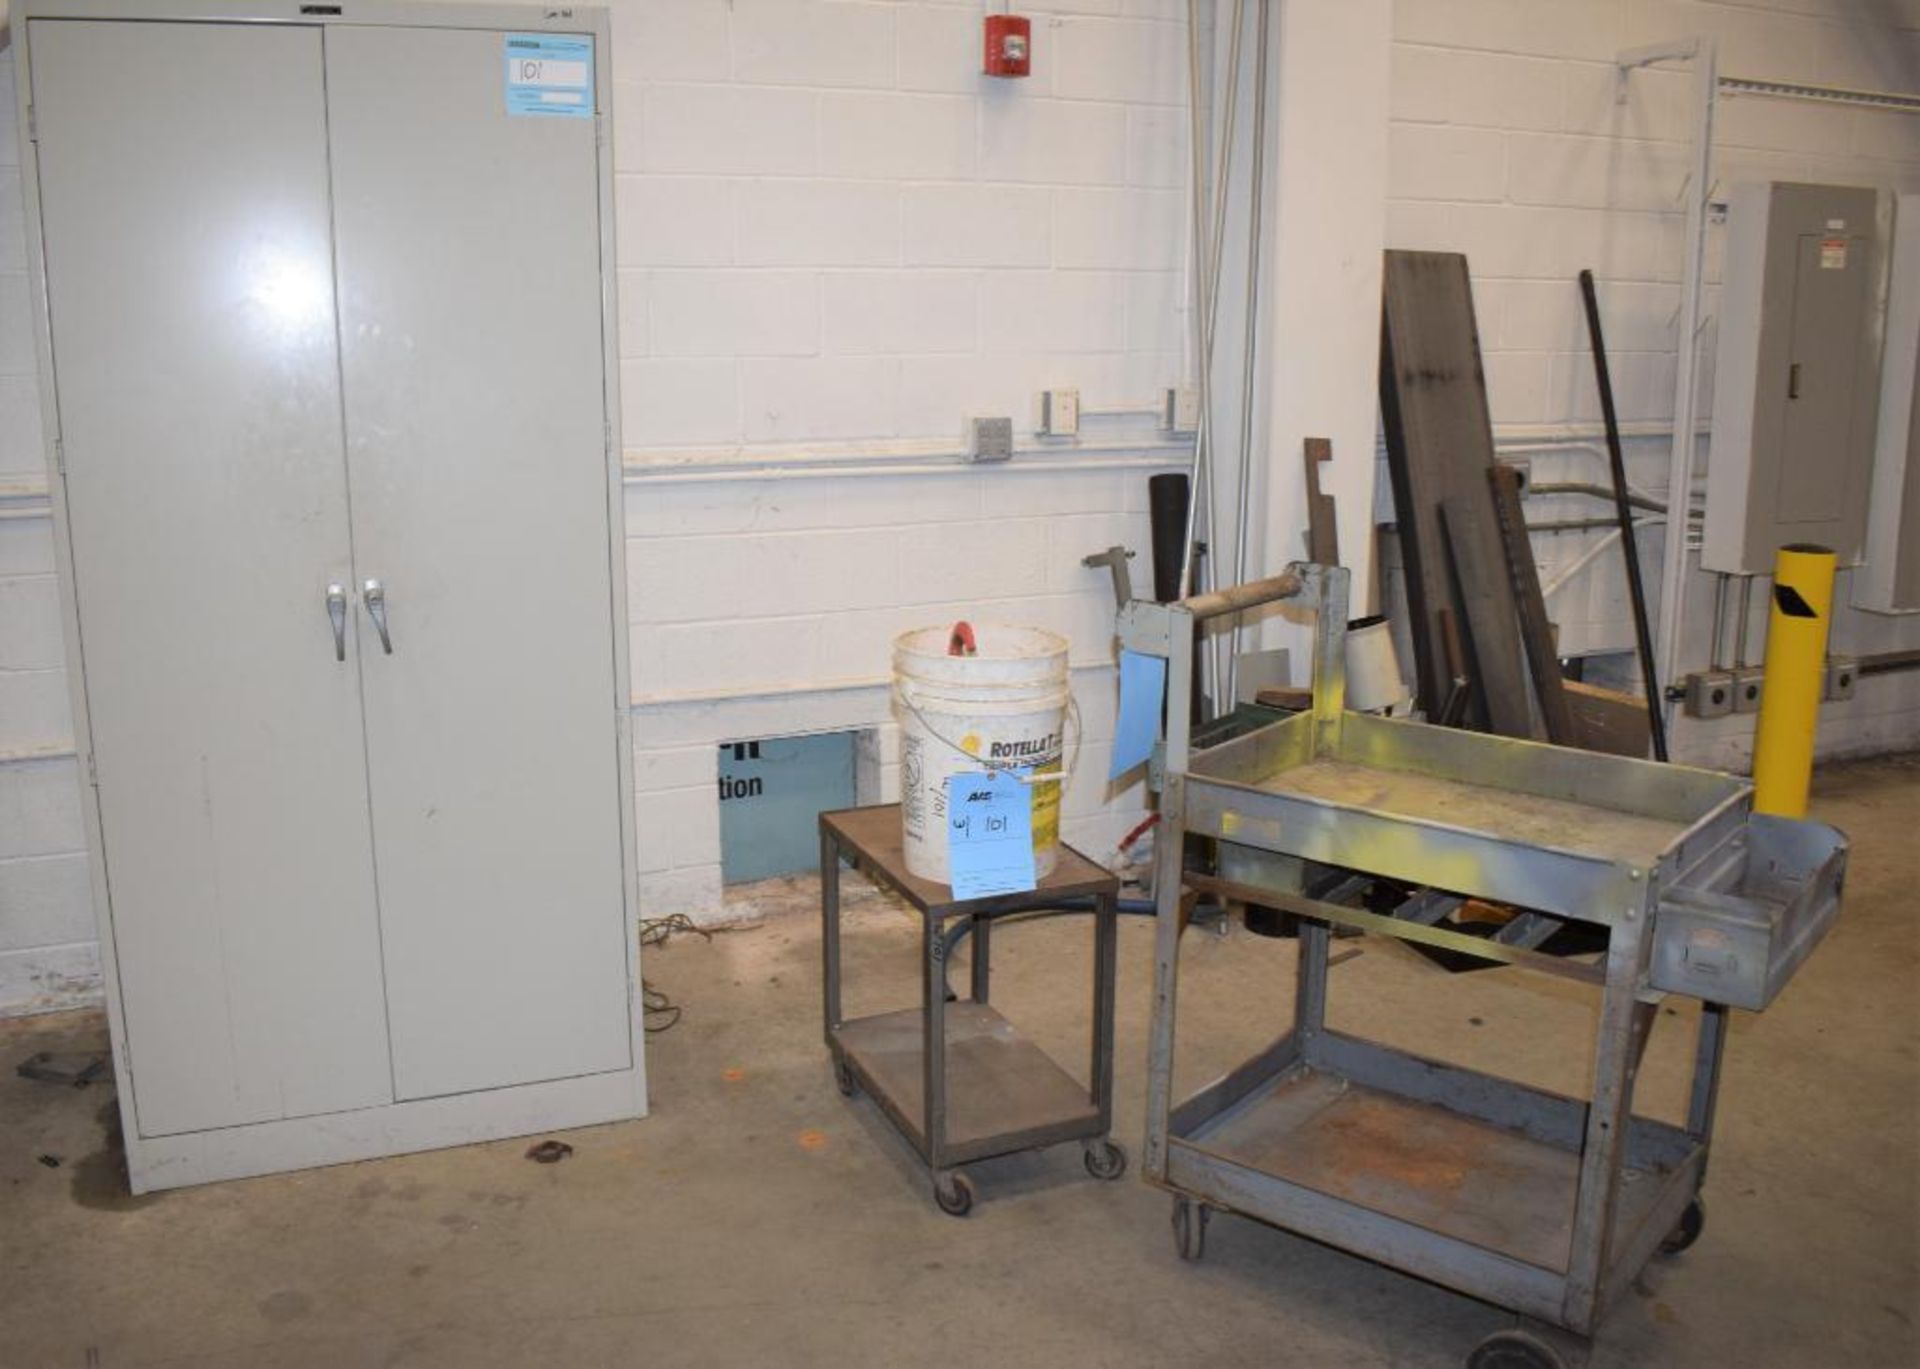 Lot Consisting Of: (1) 2 Door metal cabinets with miscellaneous tools, including saw, batteries, met